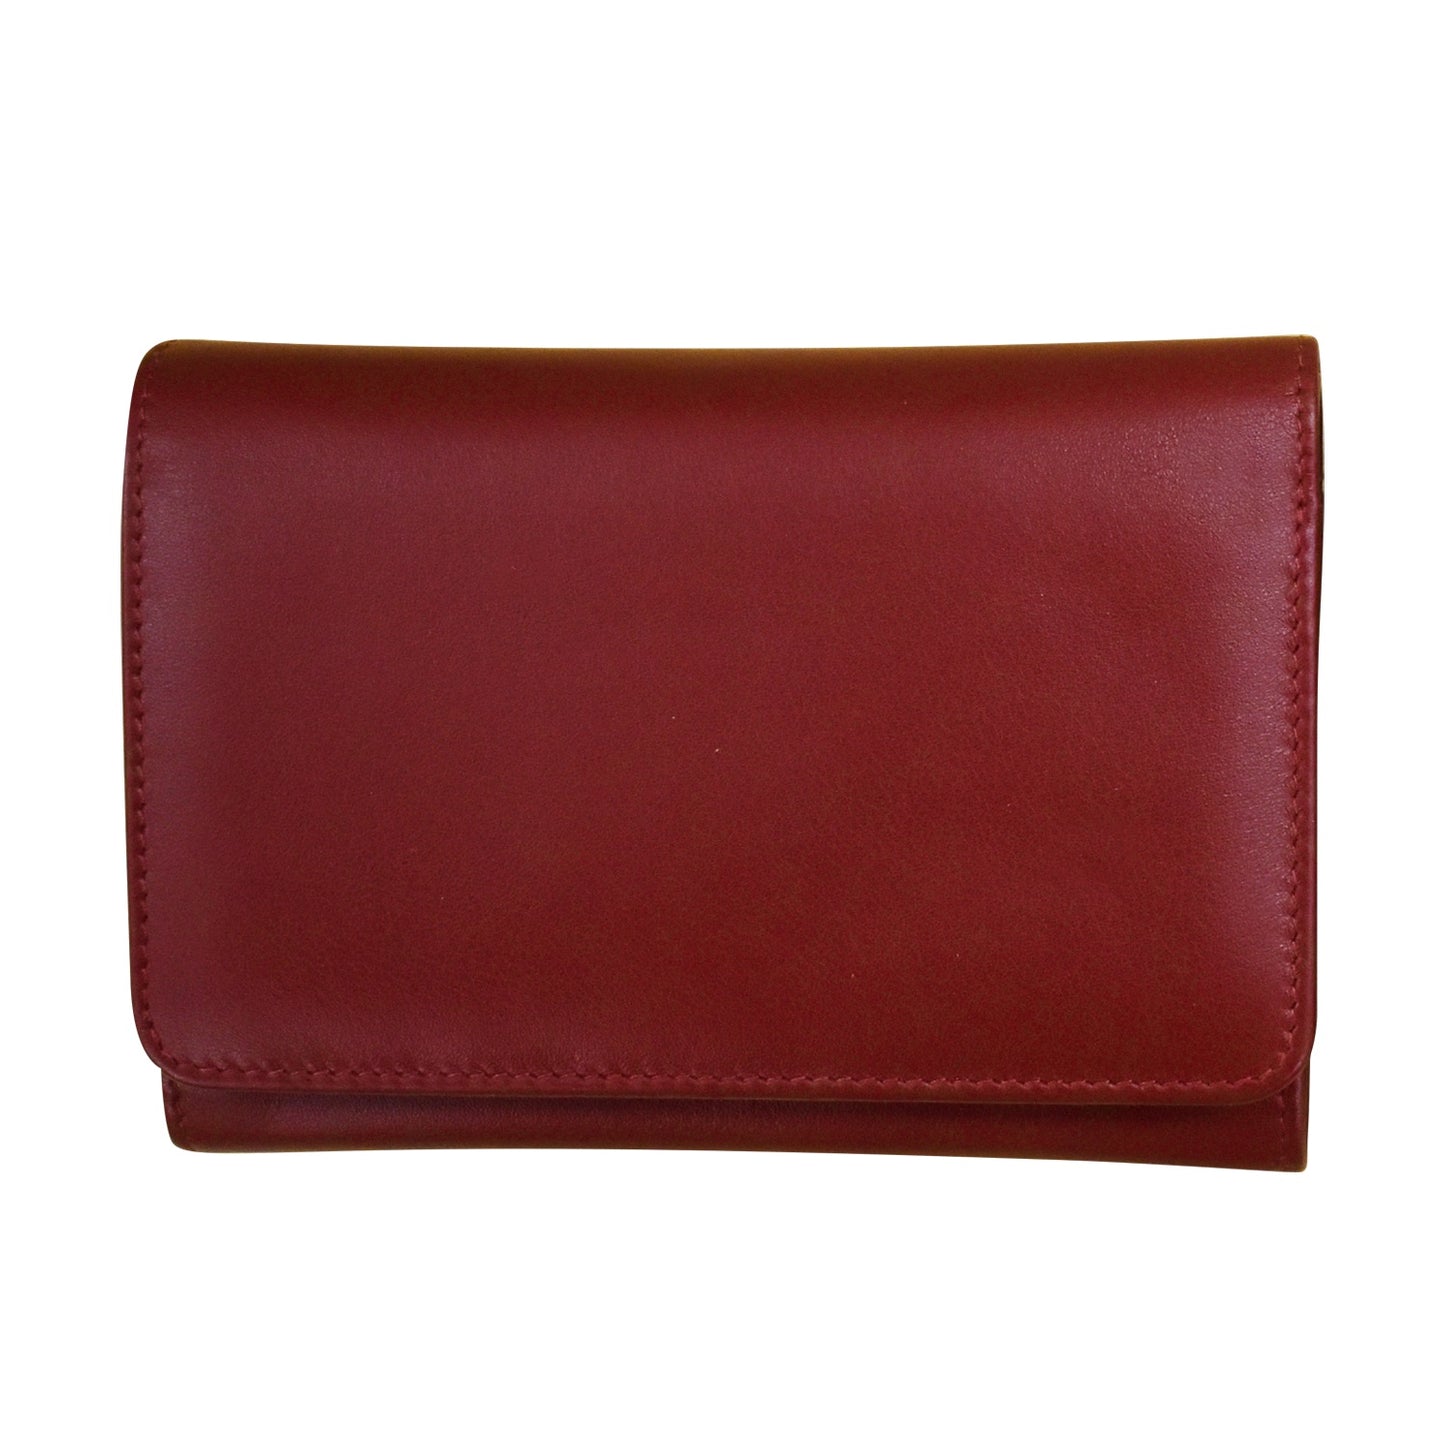 Leather French Wallet Merlot